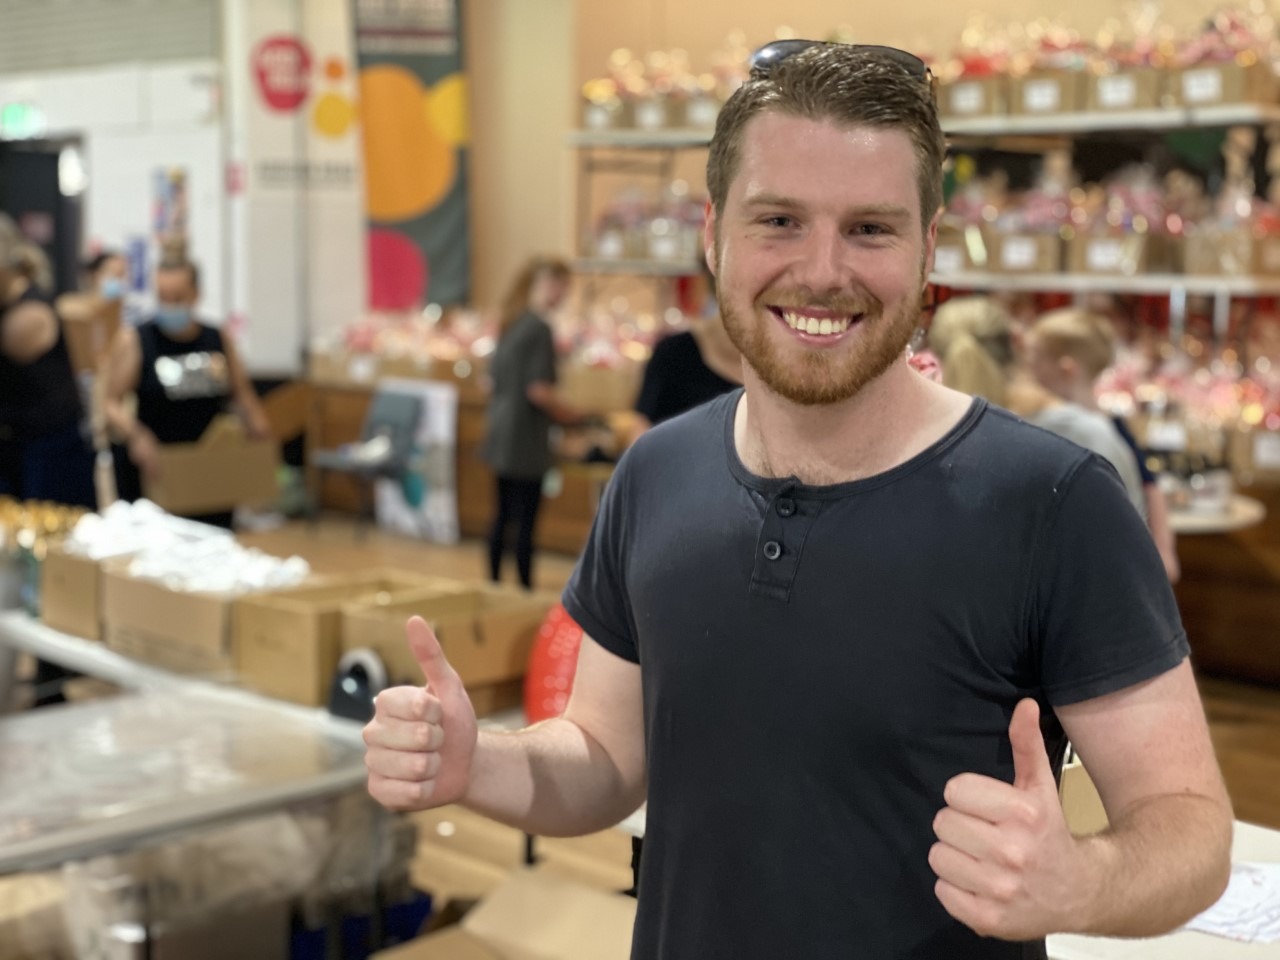 Red Frogs' Justin gives Addi Road's Hampers of Hope the thumbs up.